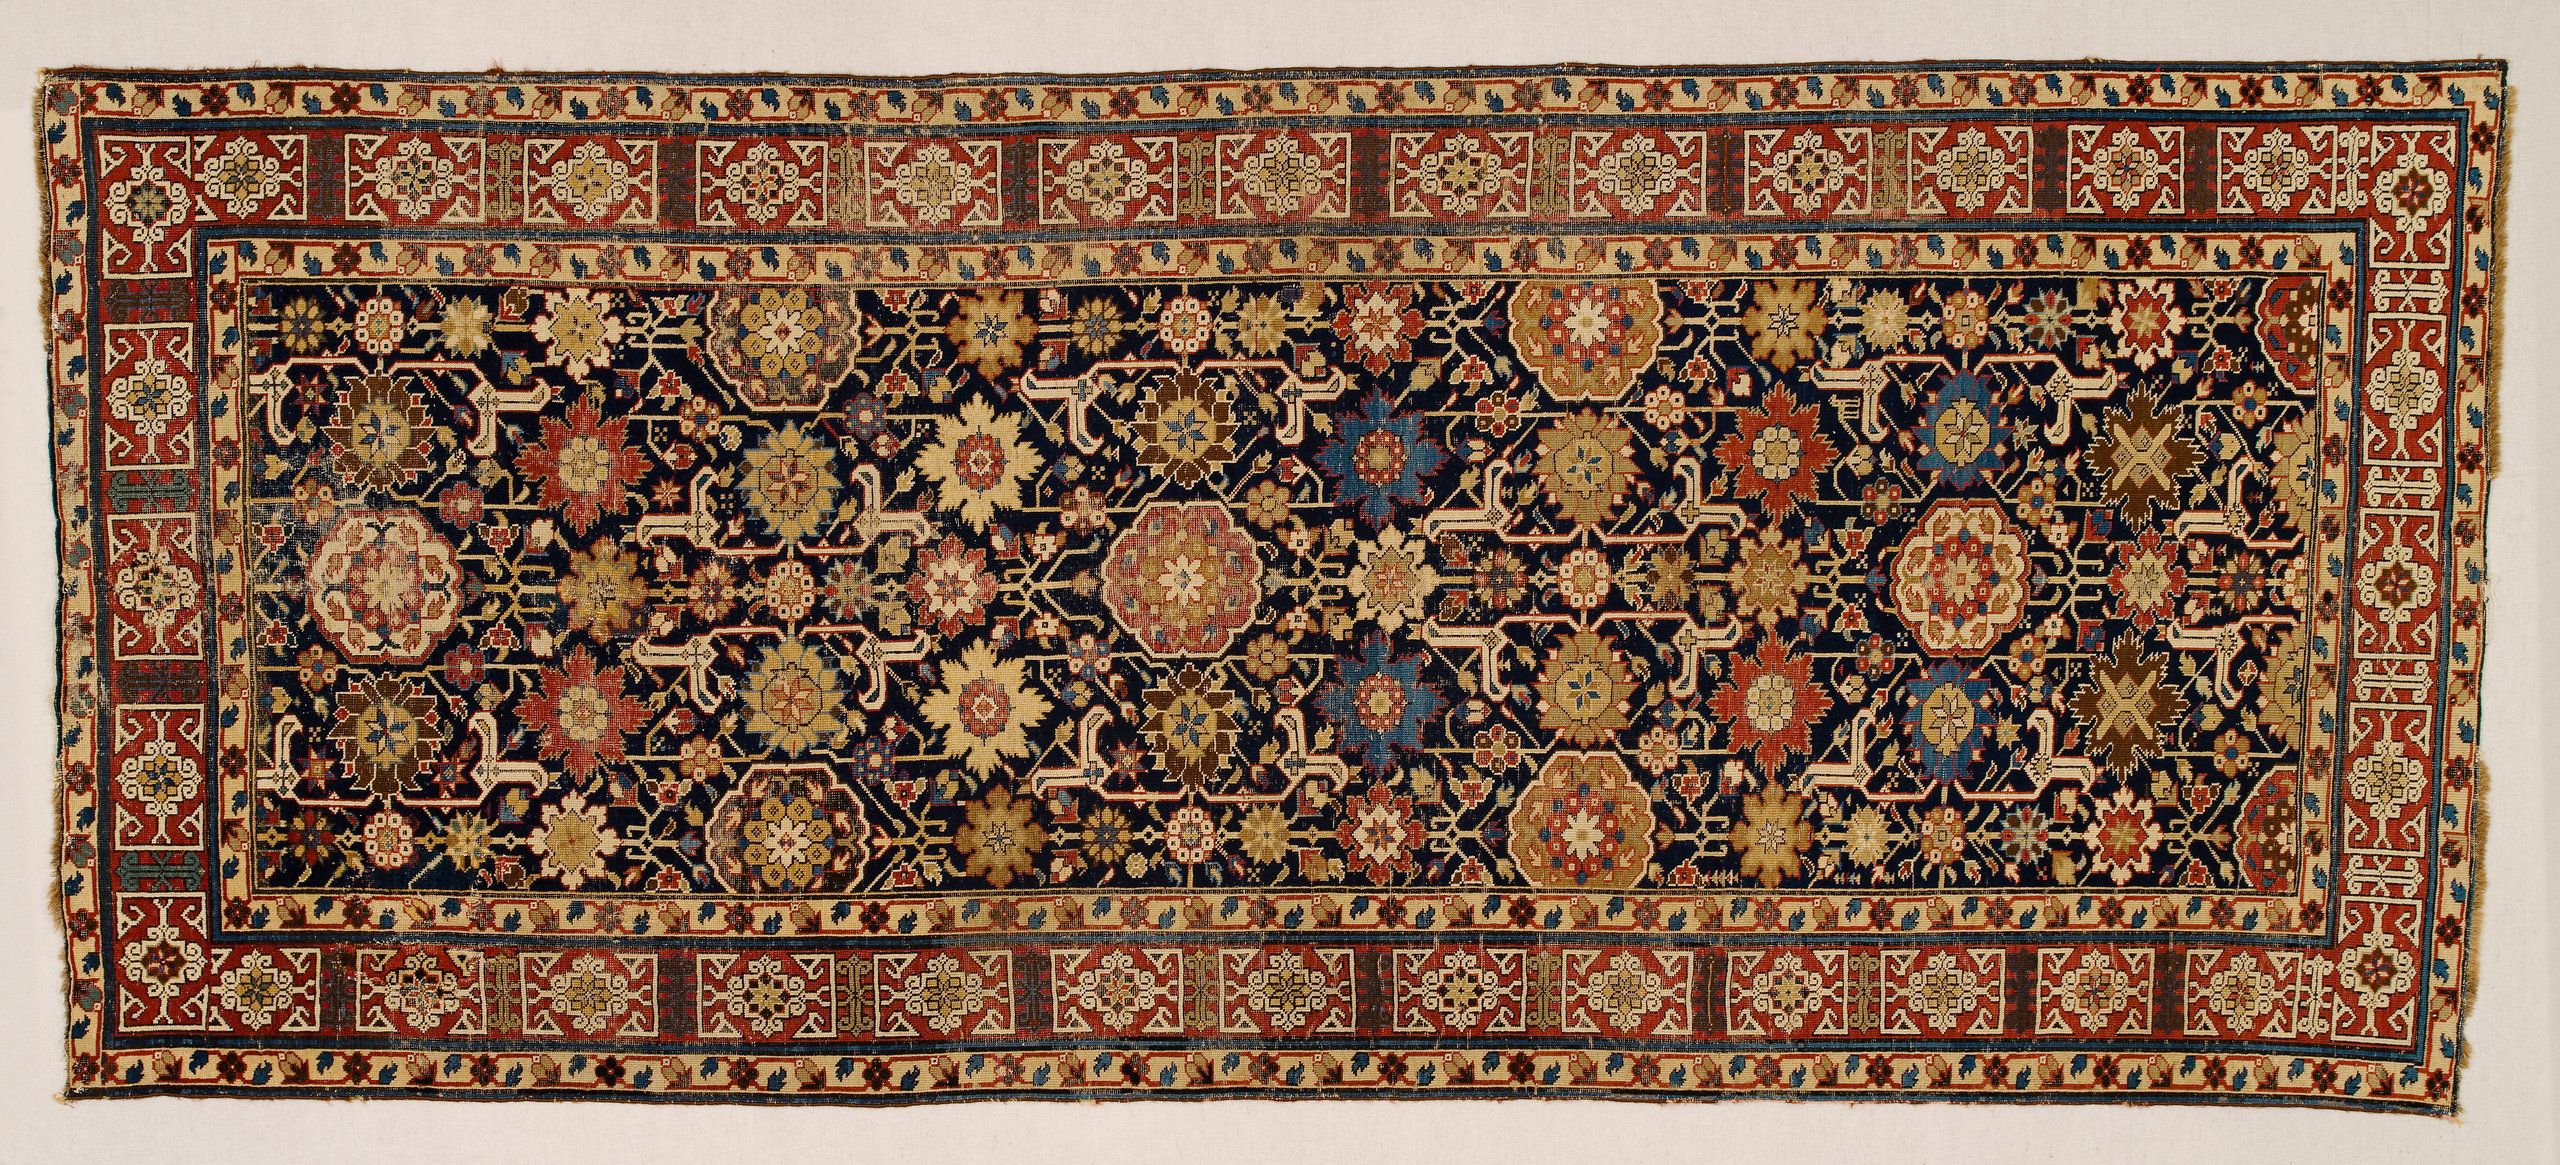 Afshan runner from the Shirvan district, Caucasus